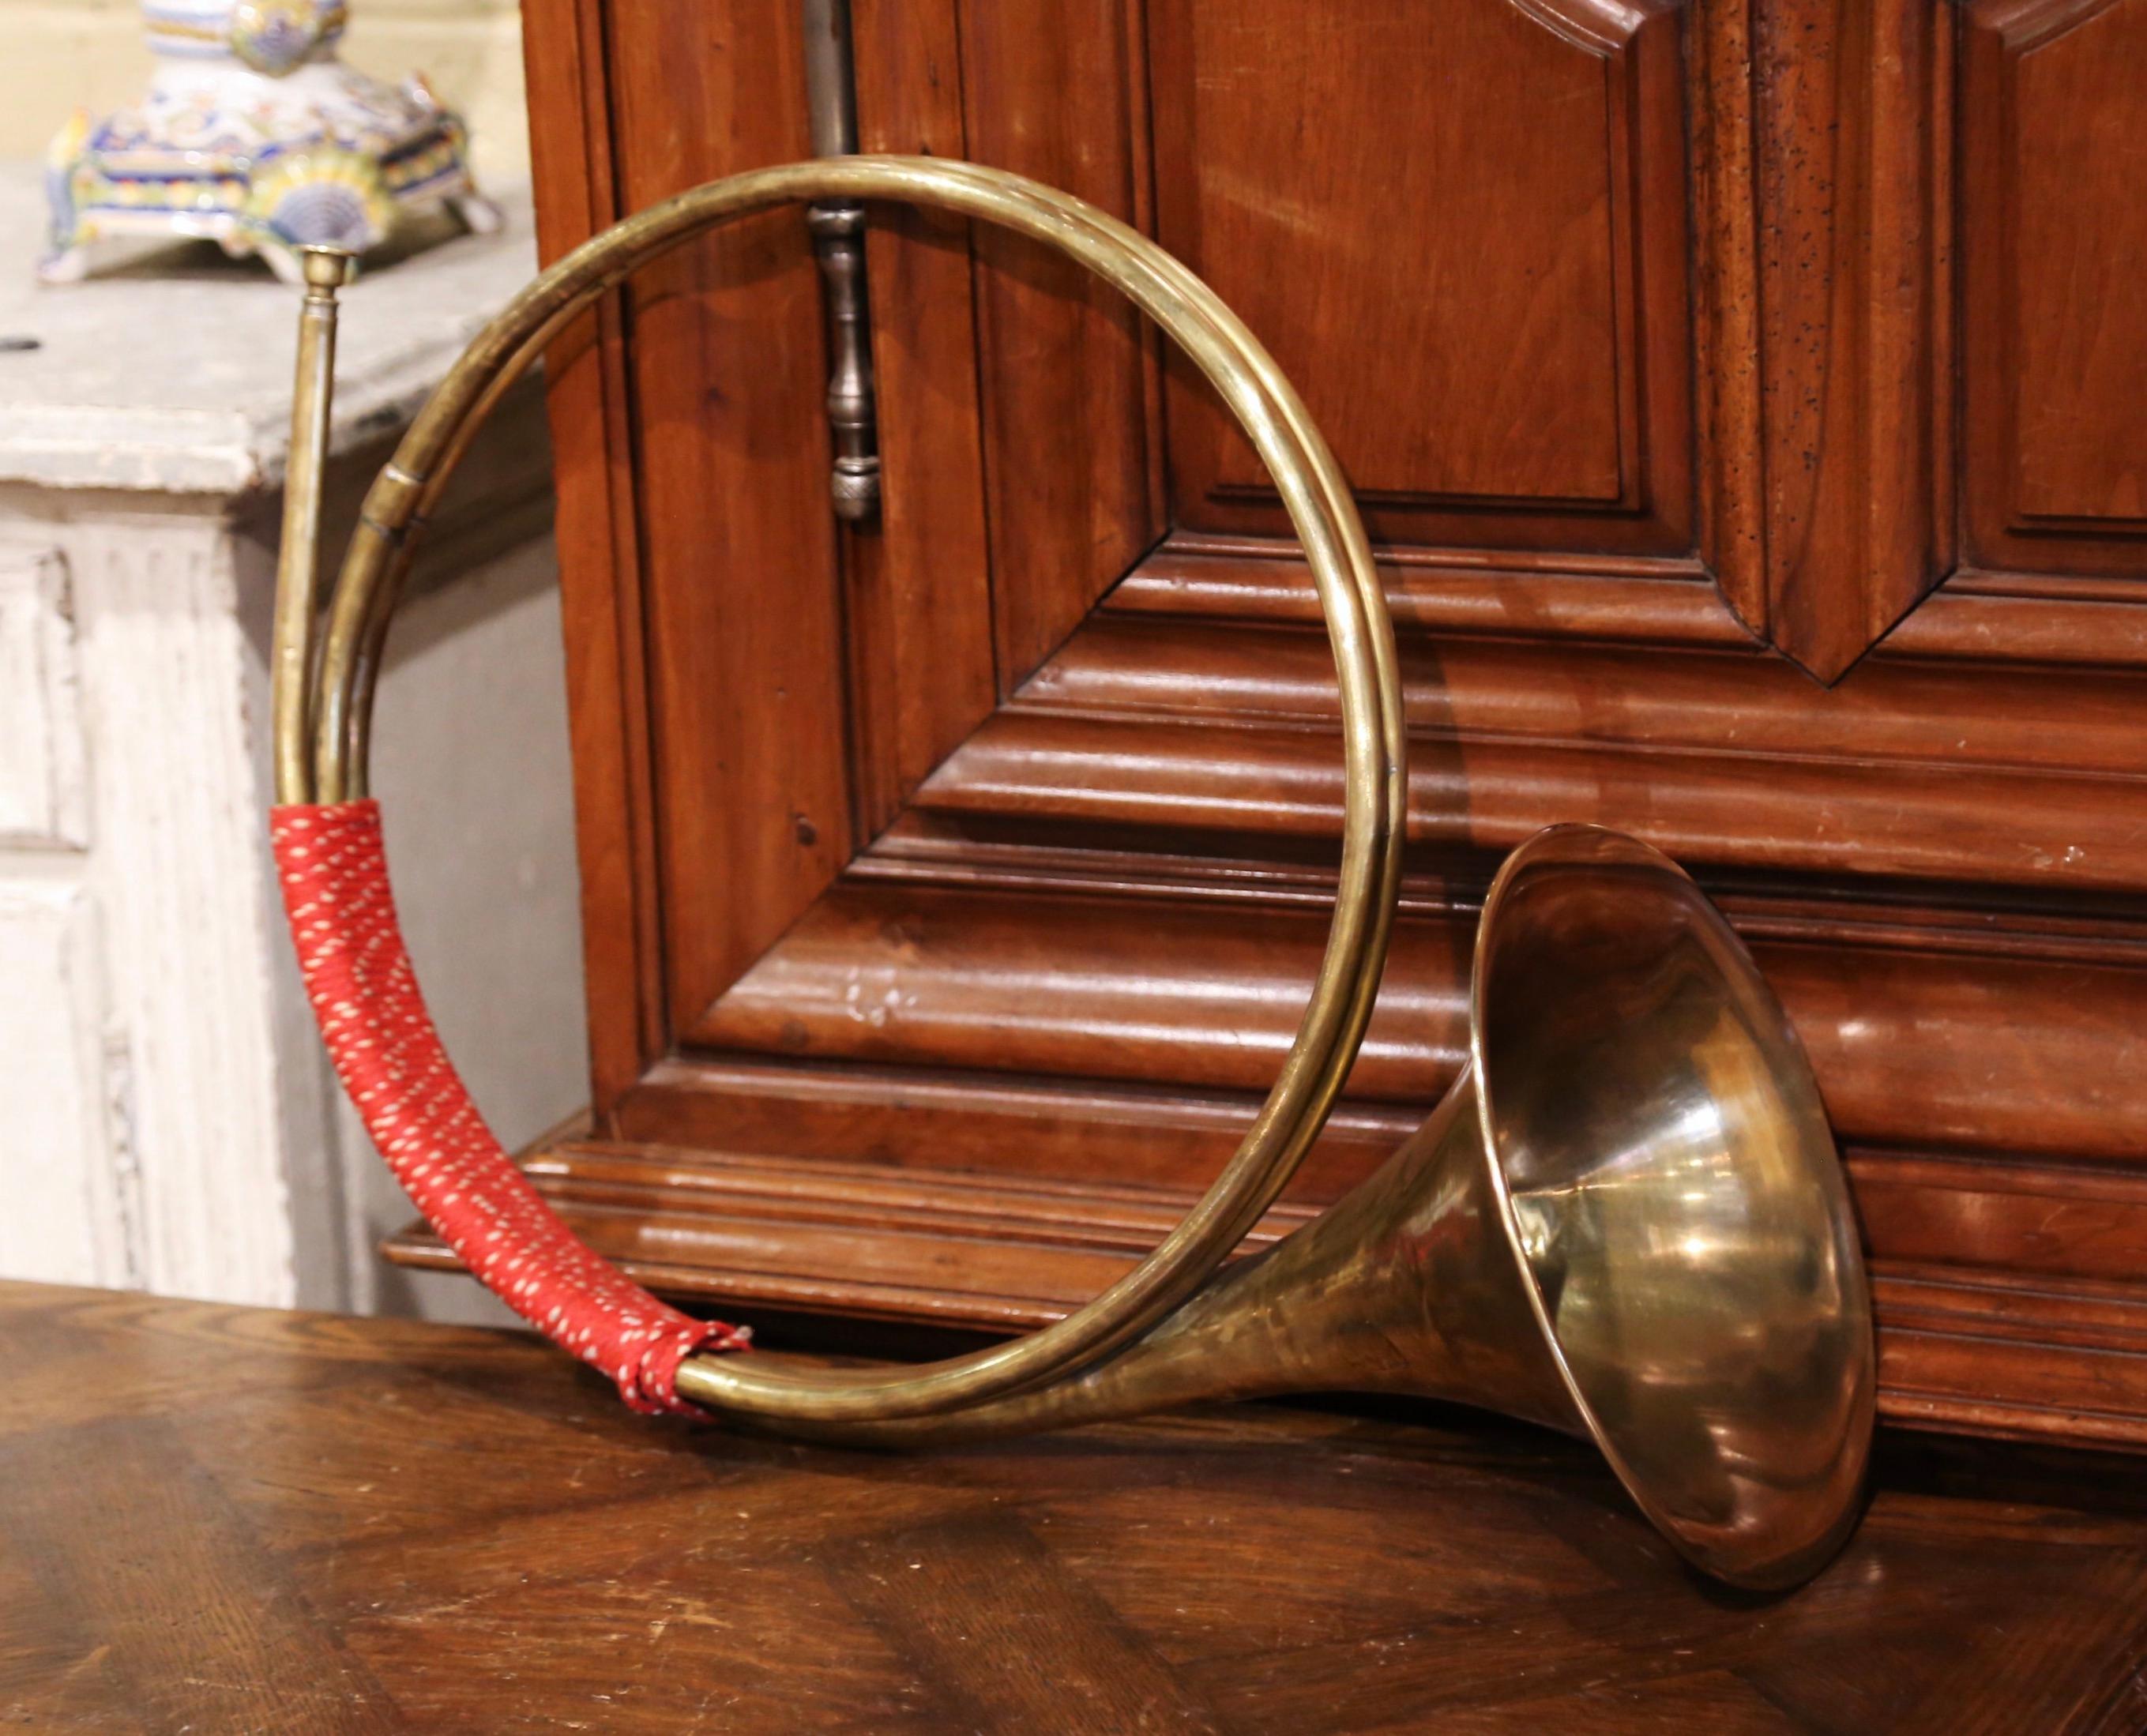 This horn was created in France circa 1920, made of brass, this kind of music instruments were part of the French accoutrements during the 